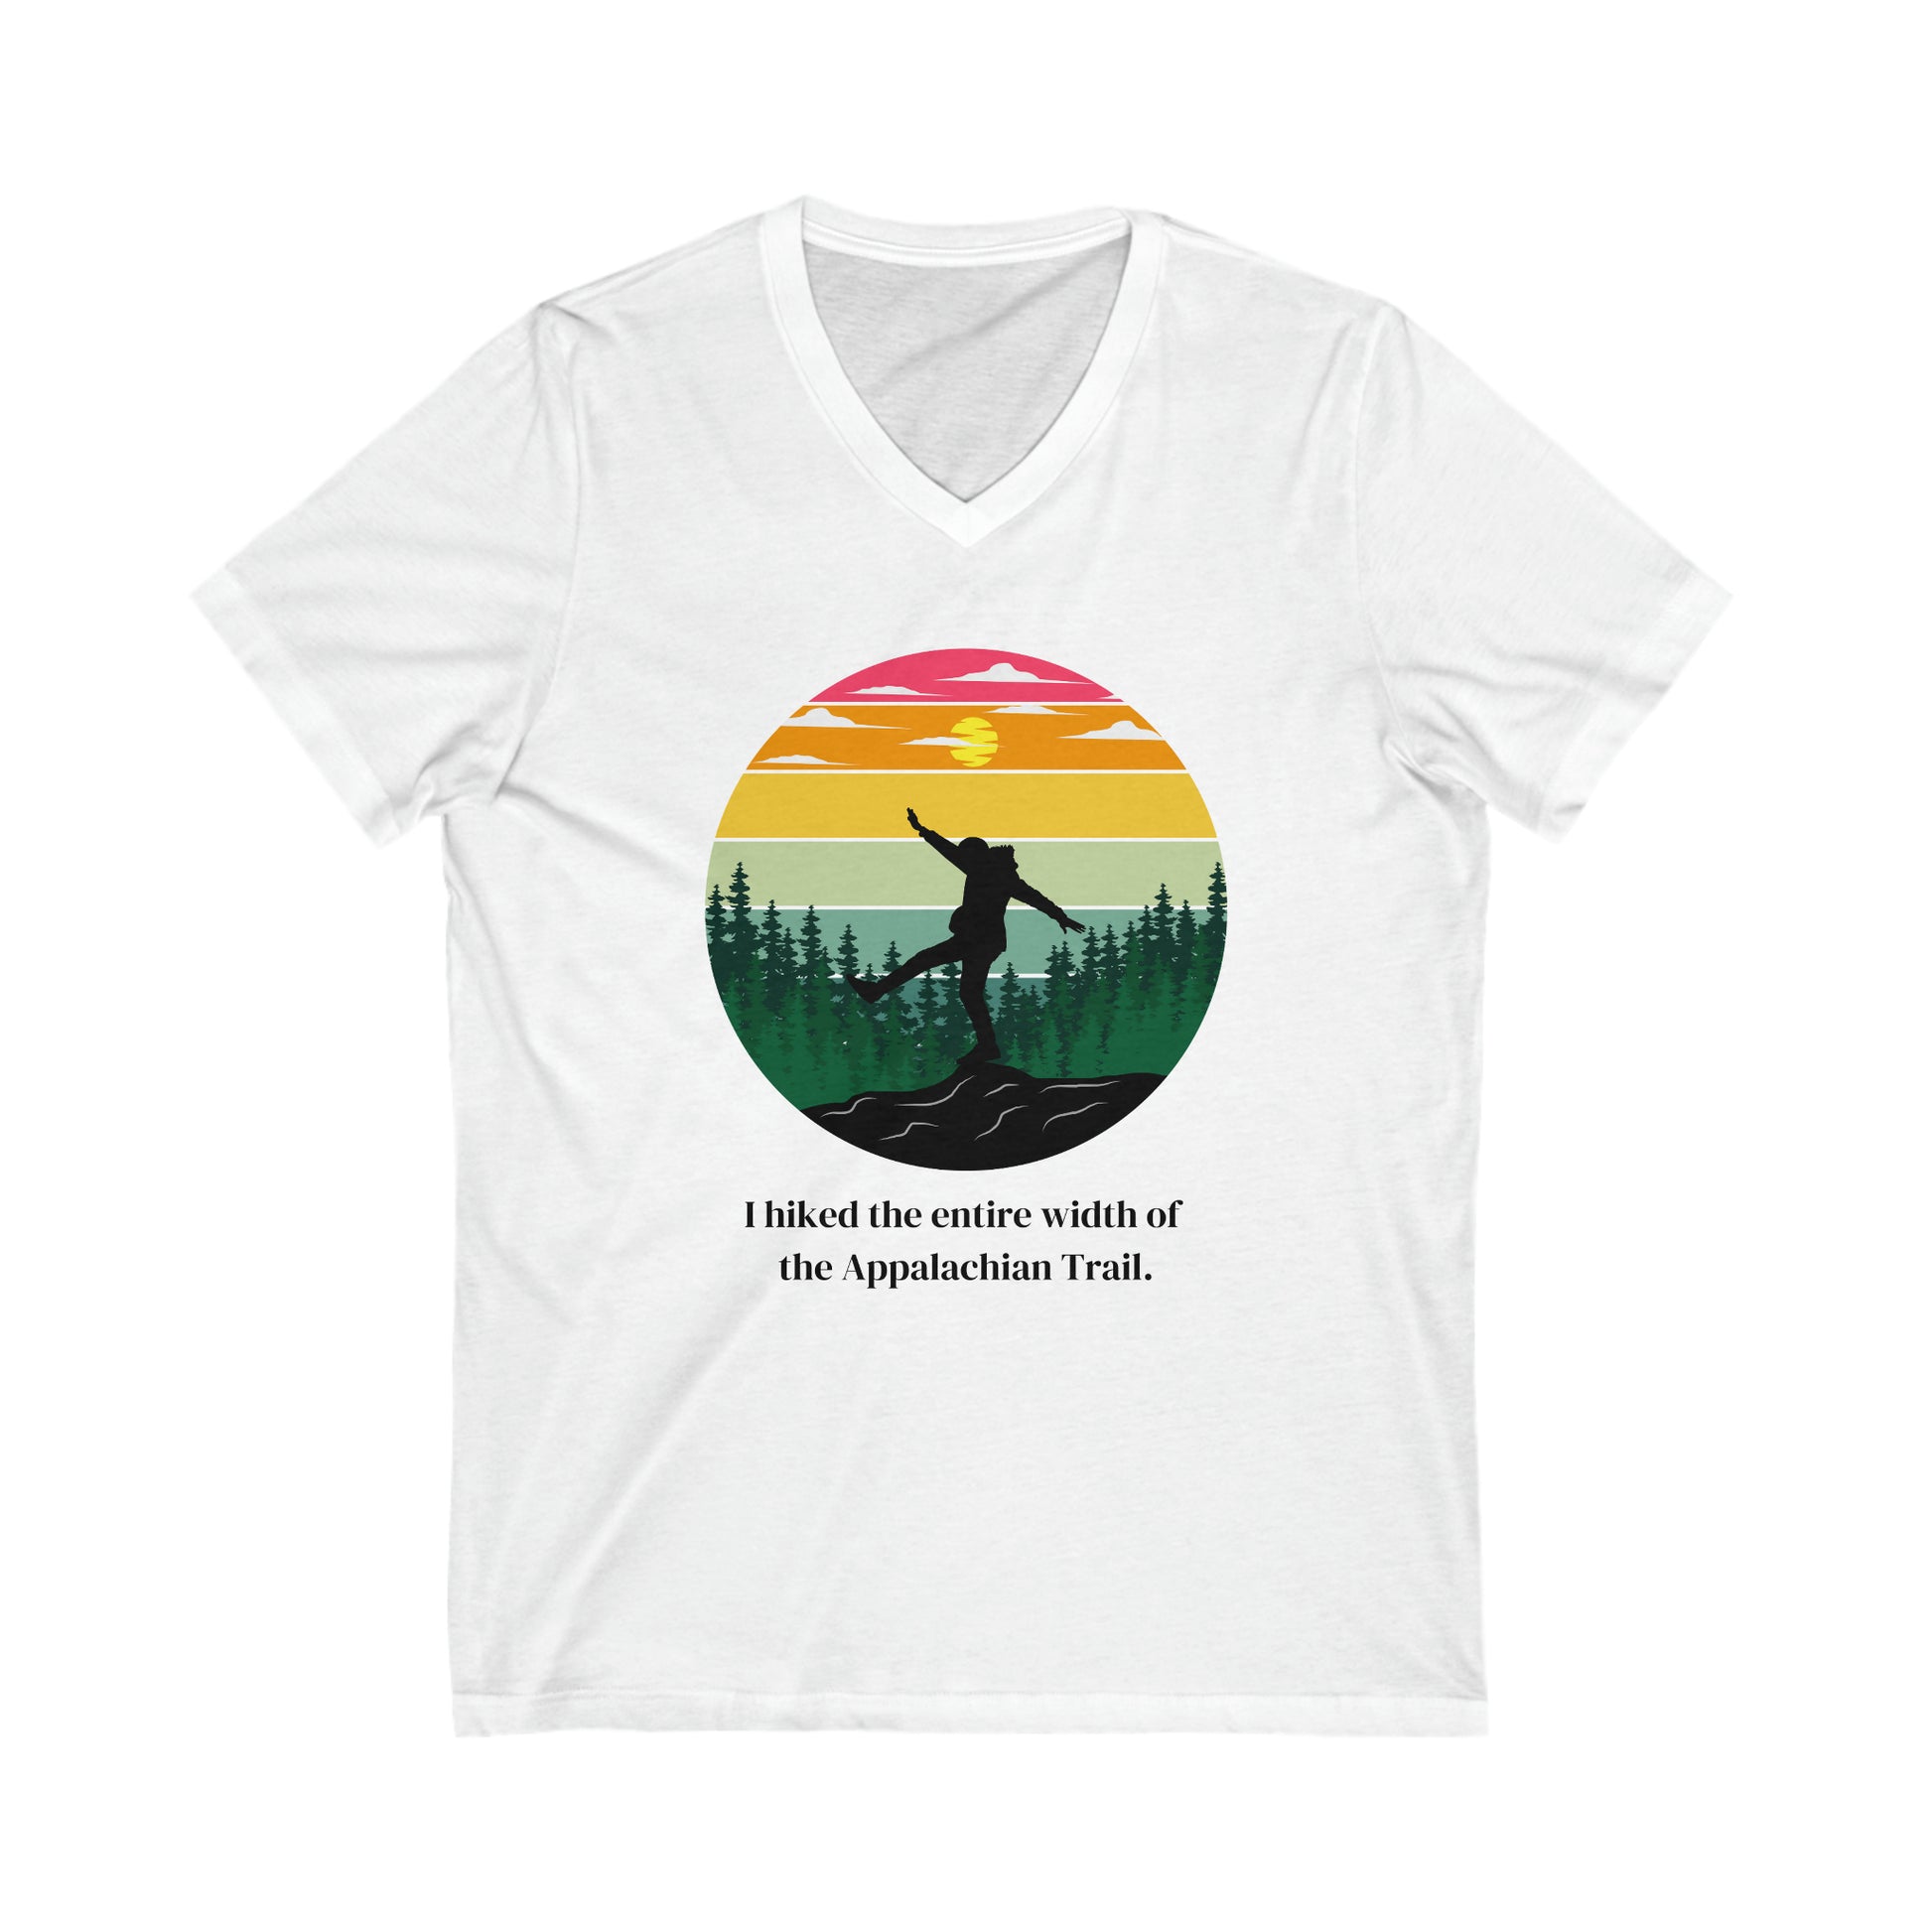 I hiked the Appalachian Trail shirt, Funny Appalachian Trail shirt, I hiked the width of the Appalachian Trail shirt, Funny shirts for hikers, shirts for hikers